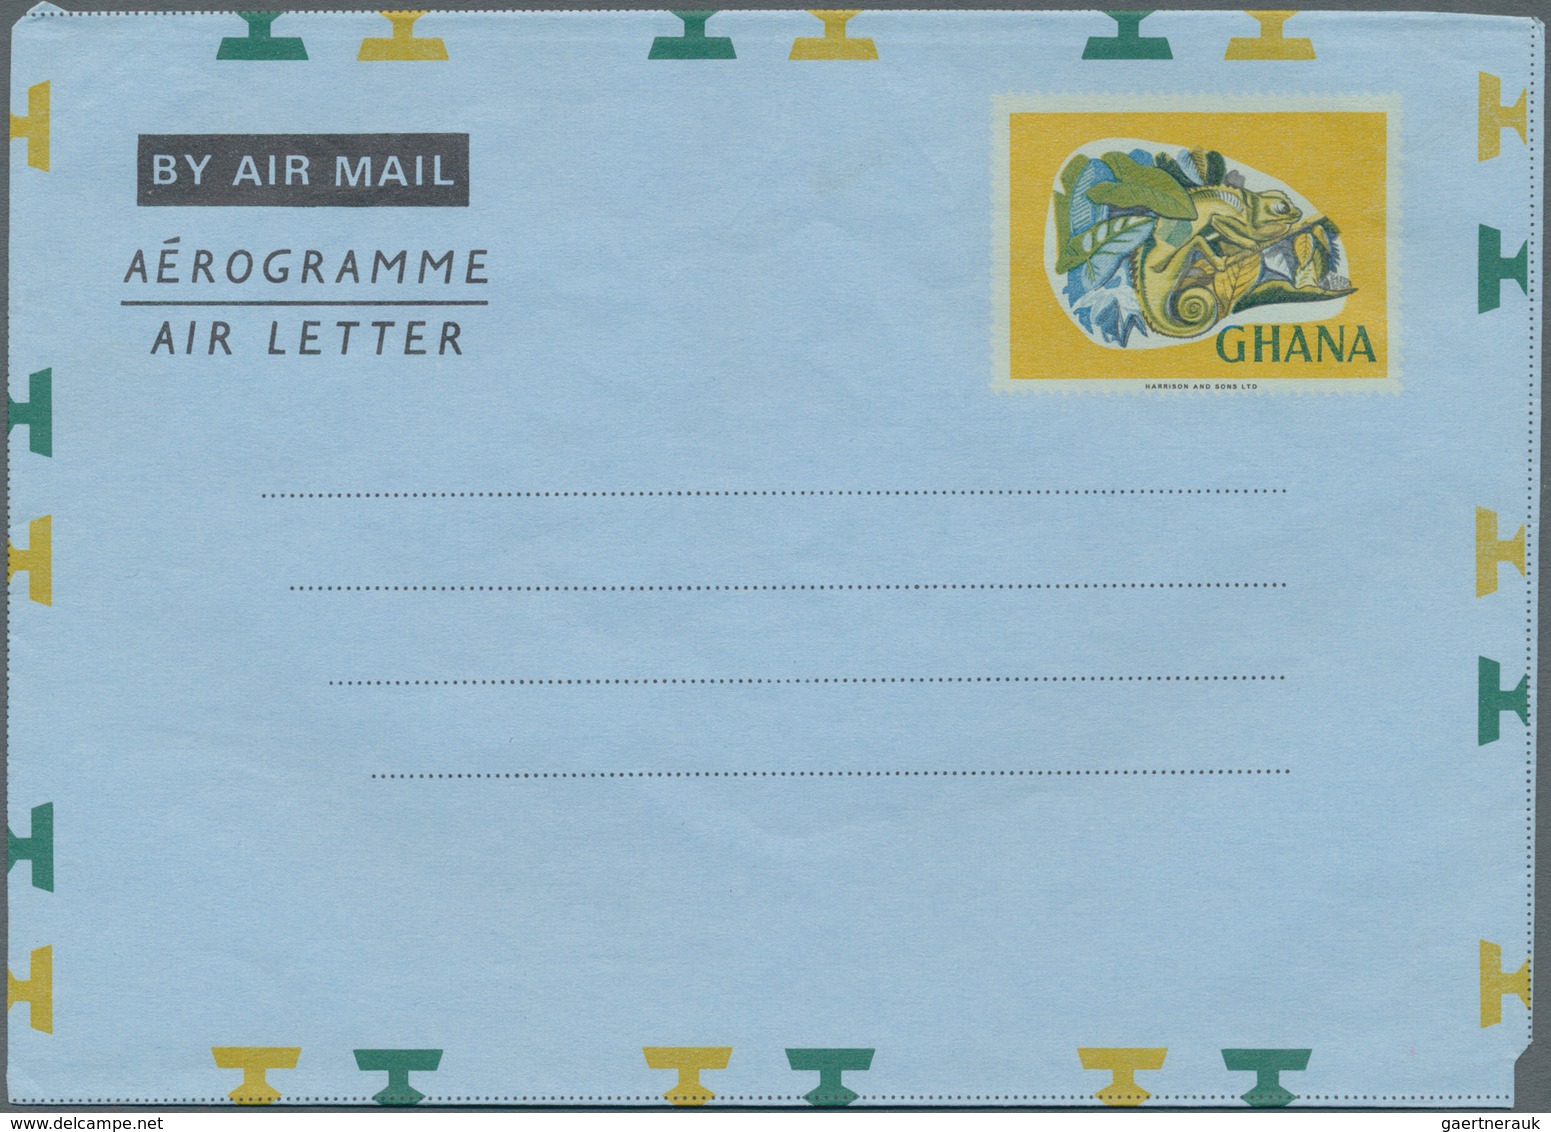 Ghana: 1952/2000 (ca.), AEROGRAMMES: the large accumulation inc. Gold Coast of about 670 mint and us